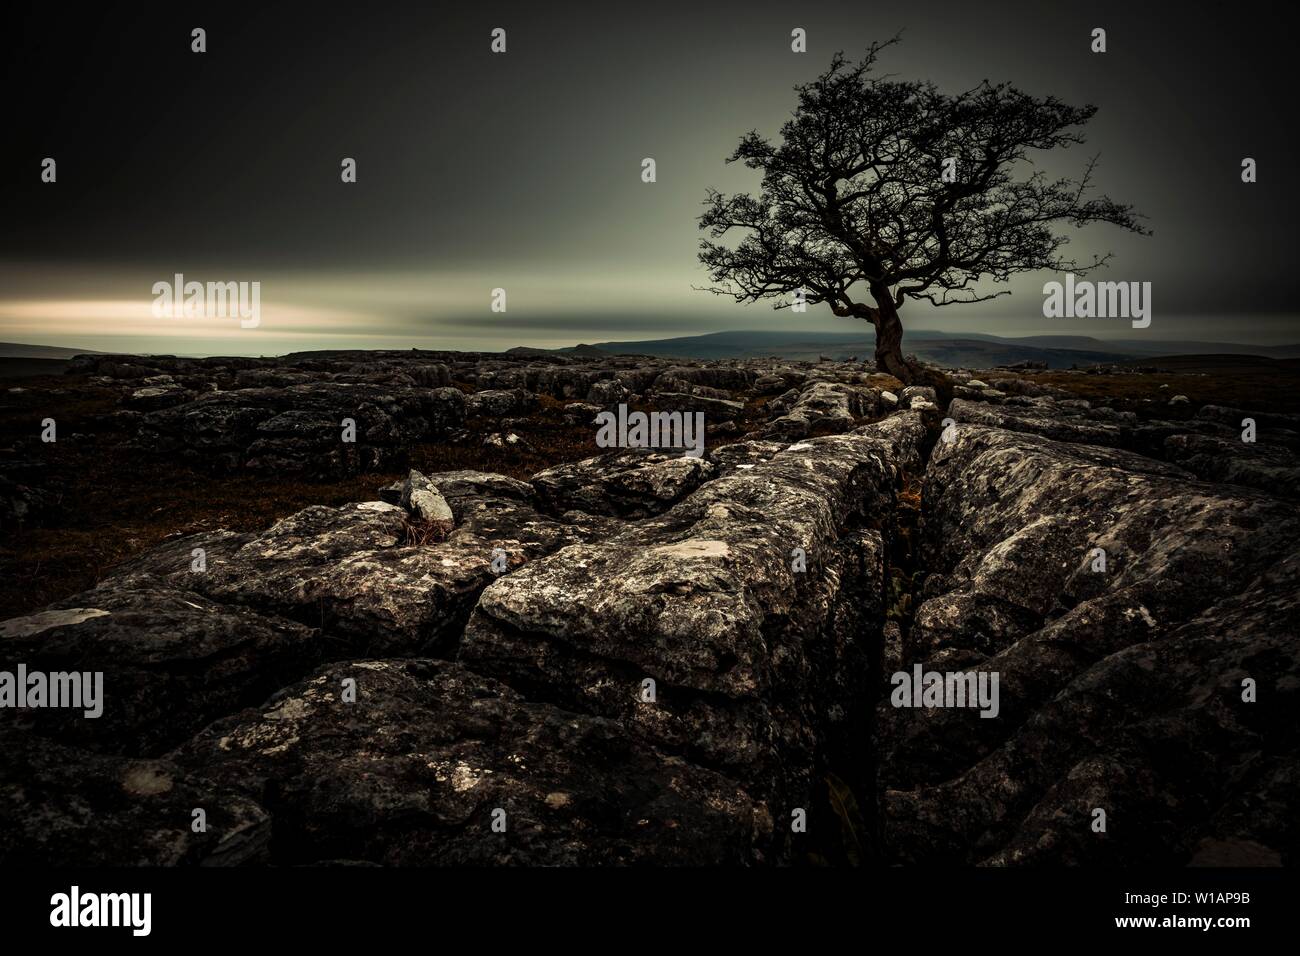 Bald tree on rocky ground with dark cloudy sky, Settle, Yorkshire Dales National Park, Midlands, United Kingdom Stock Photo